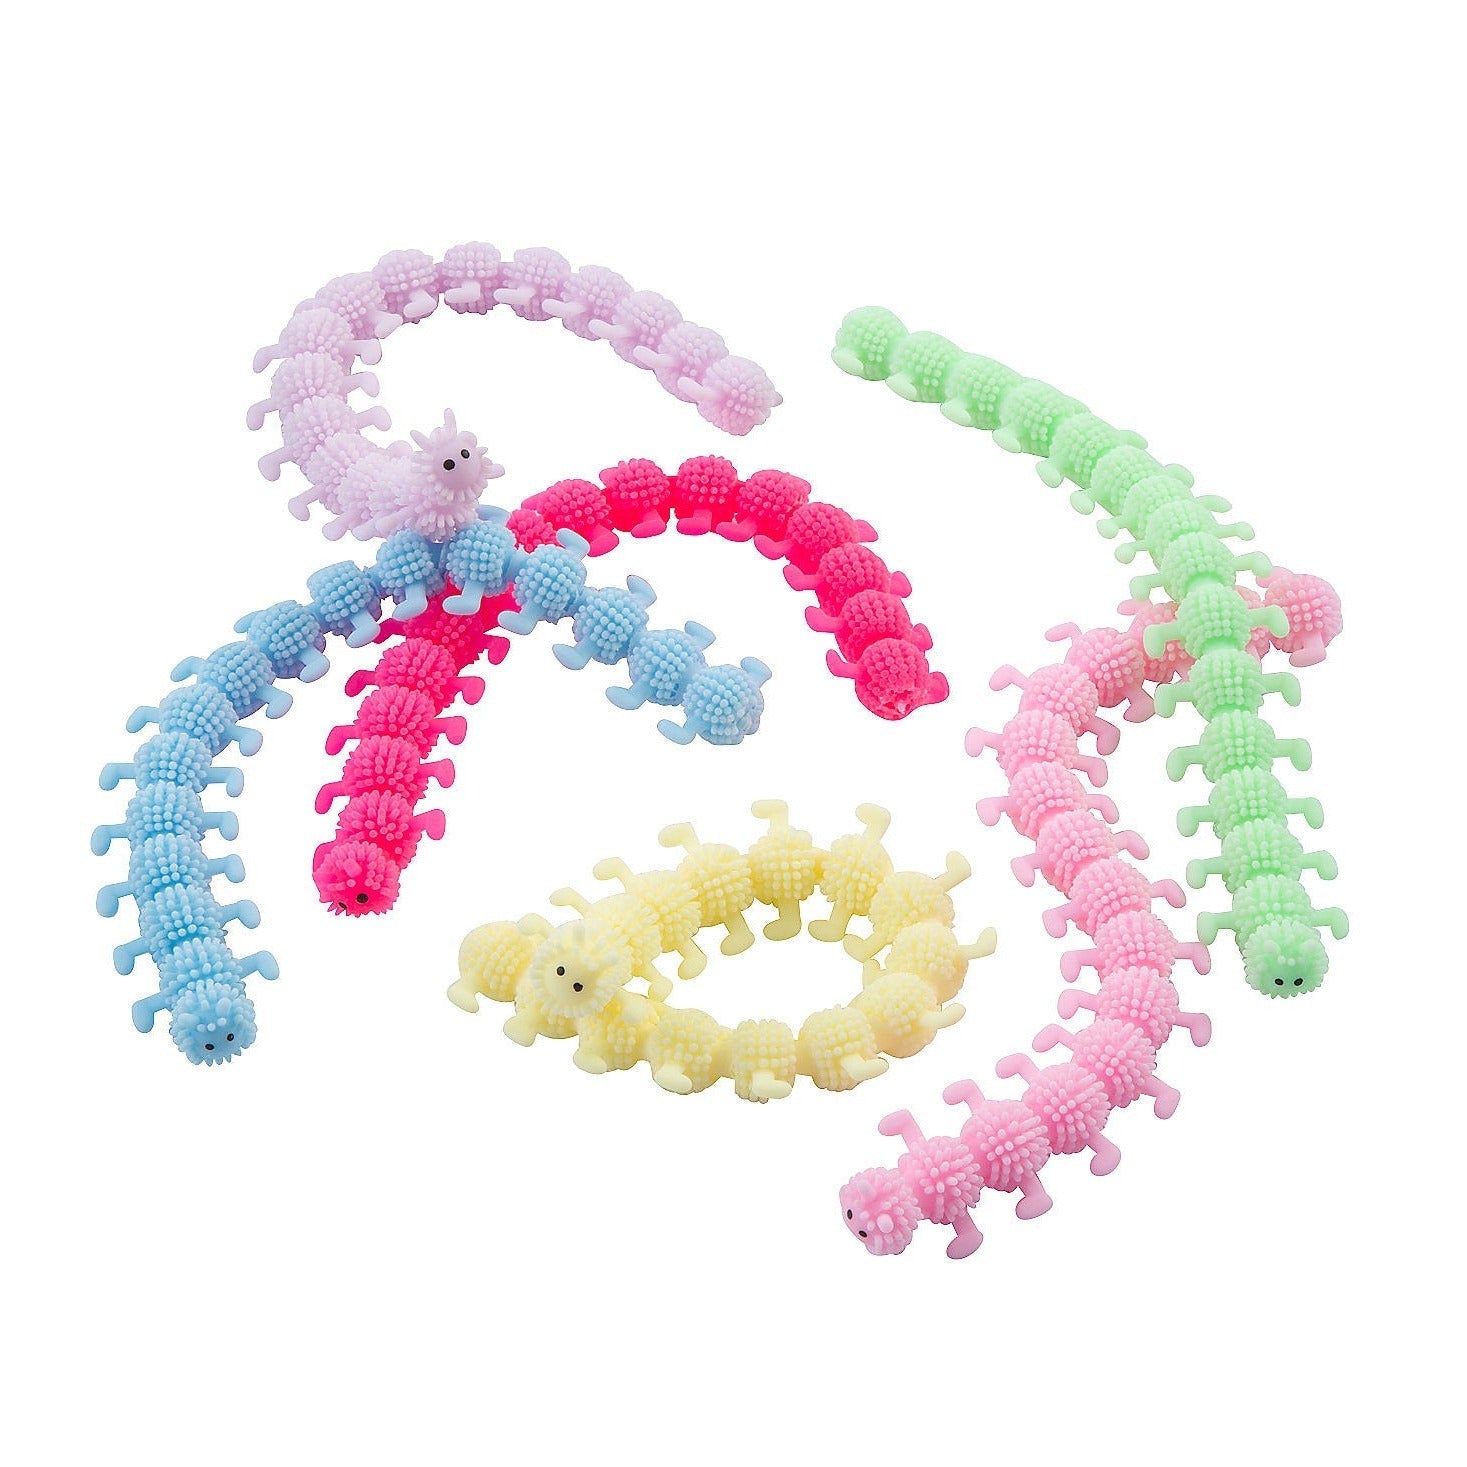 Super Stretchy Caterpillar, We love this Super Stretchy Caterpillar - and we know you will too! Made of solid but soft rubber and covered in tiny spikes, the mega stretch caterpillar is 9 inches (23 cm) long at rest and can be stretched to more than 3 times that without breaking. Over two dozen rubbery legs protrude from the sides and two soft antennae top off a smooth smiling face. This unusual and cute Puffer Caterpillar is a highly pliable rubbery worm shape covered in soft stretchy tentacles. A super re